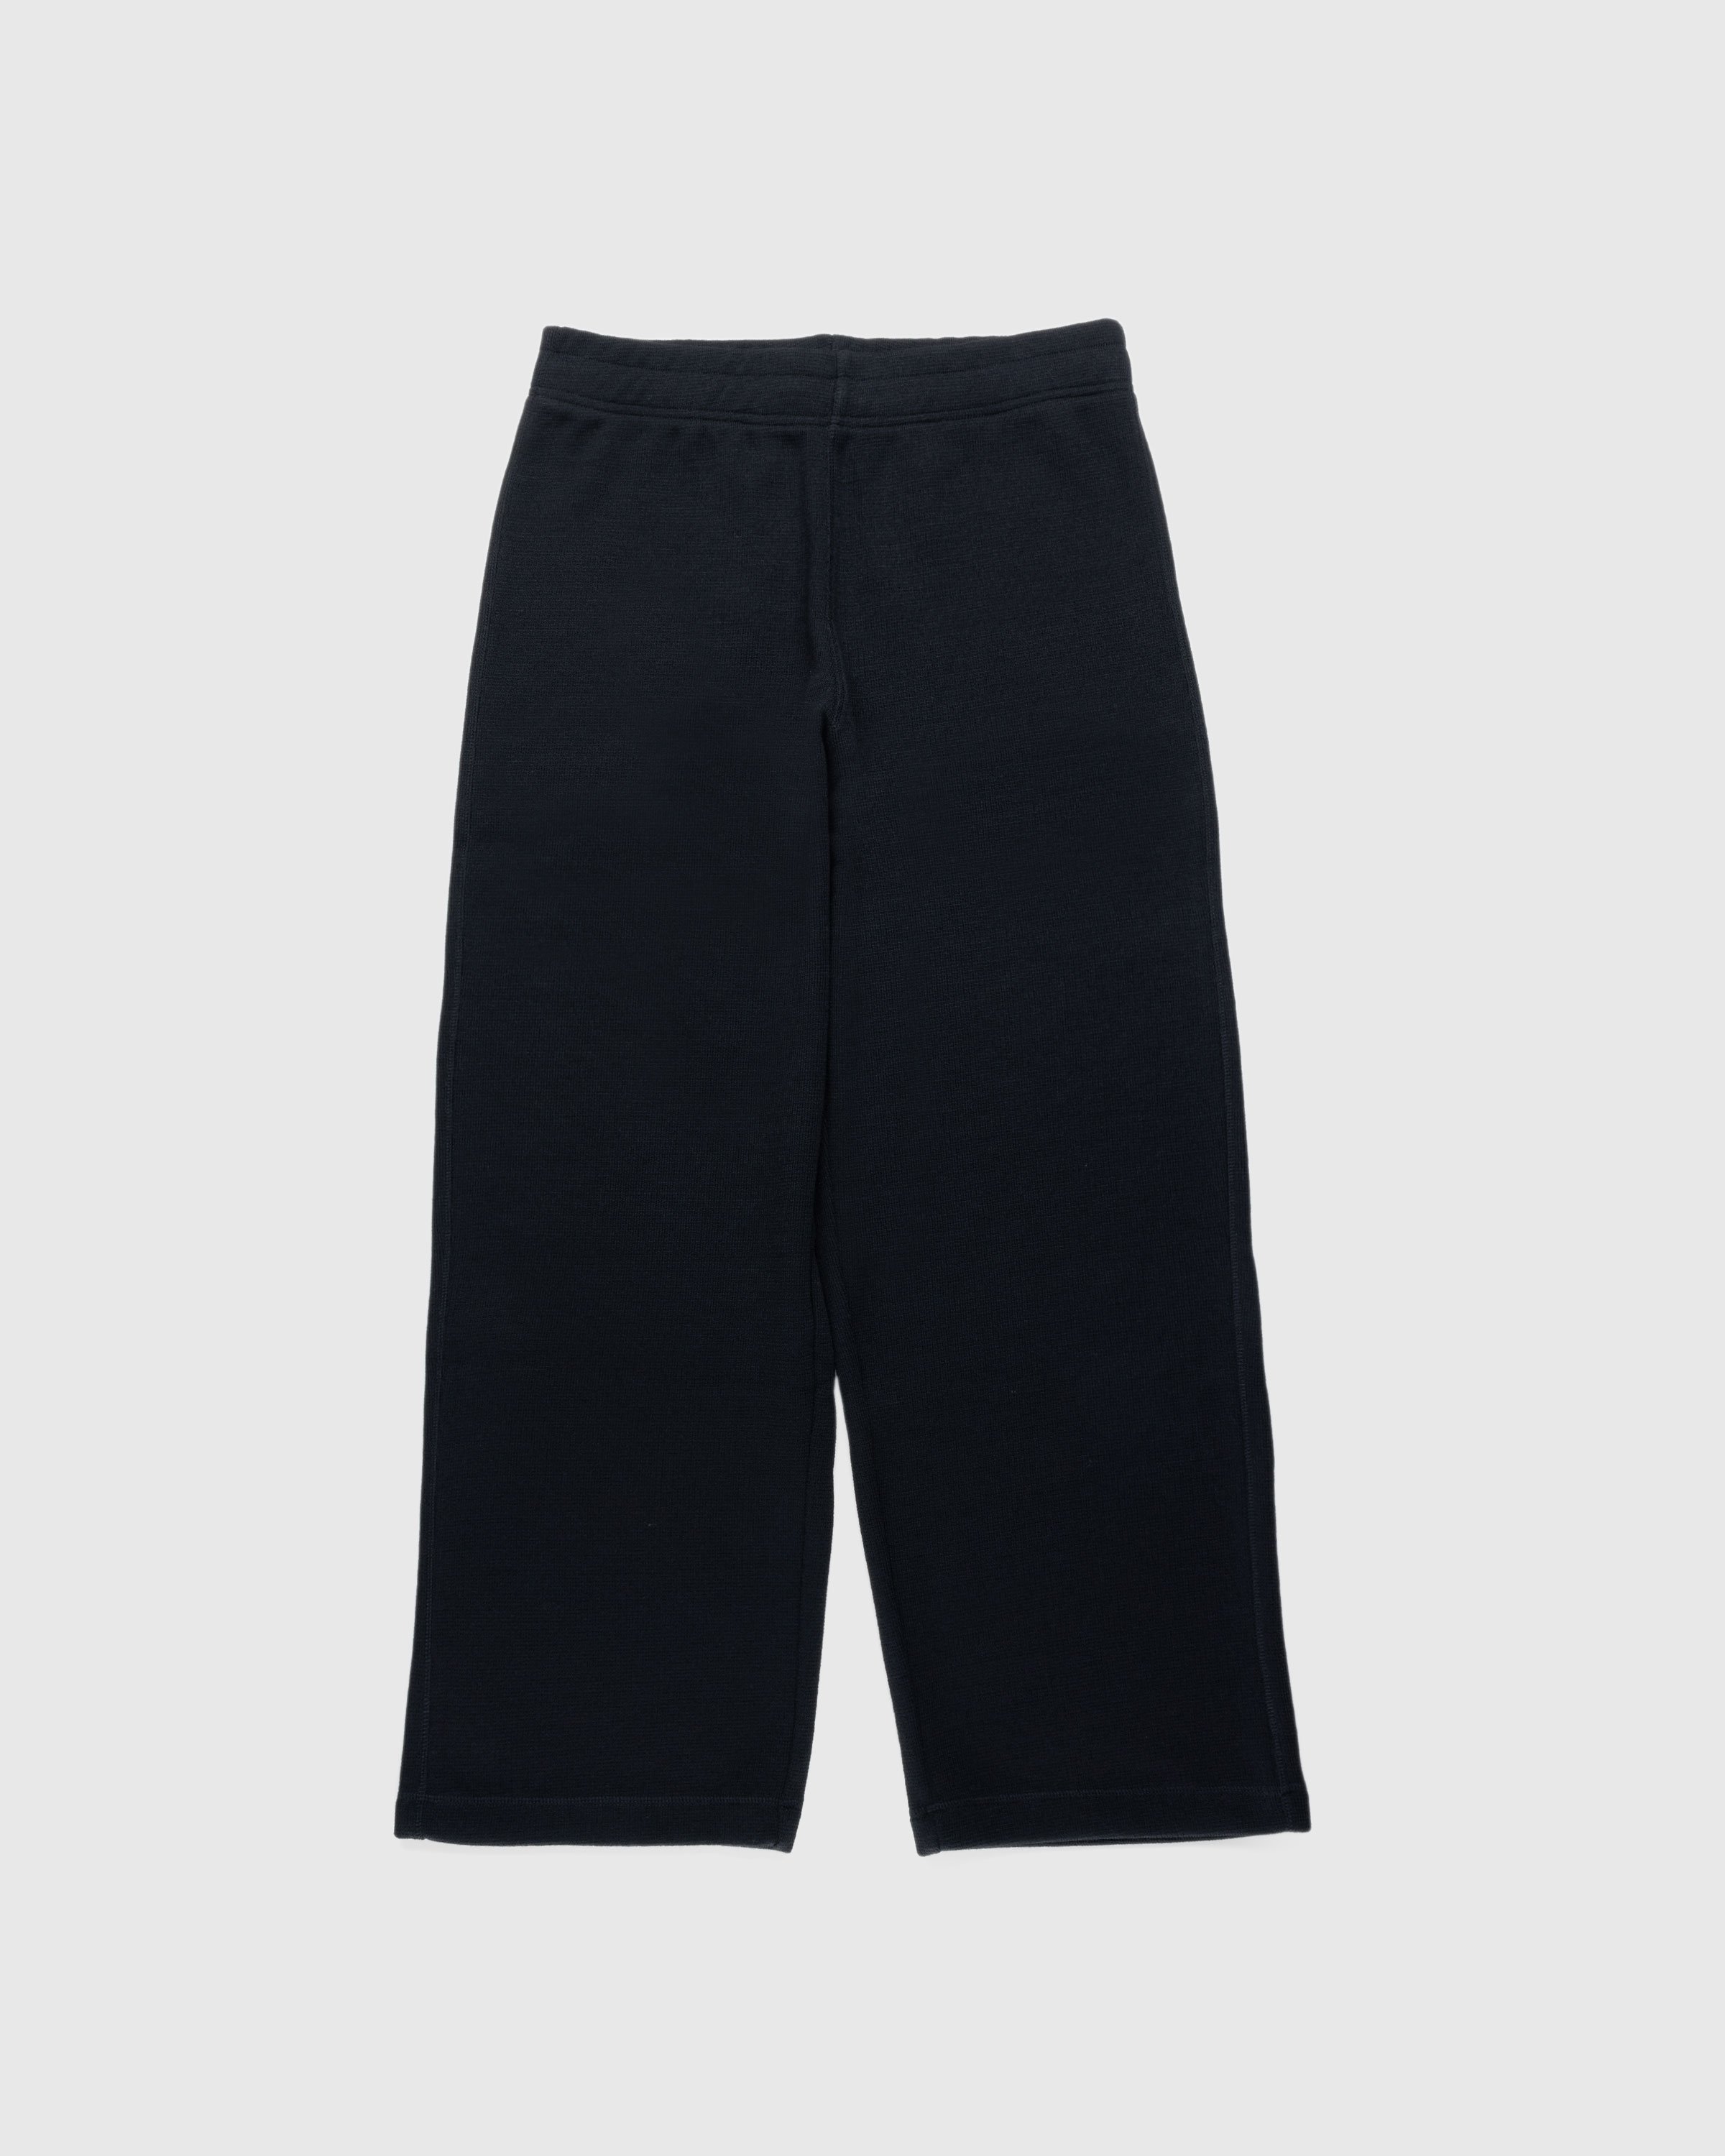 Our Legacy - REDUCED TROUSER Black - Clothing - Black - Image 1